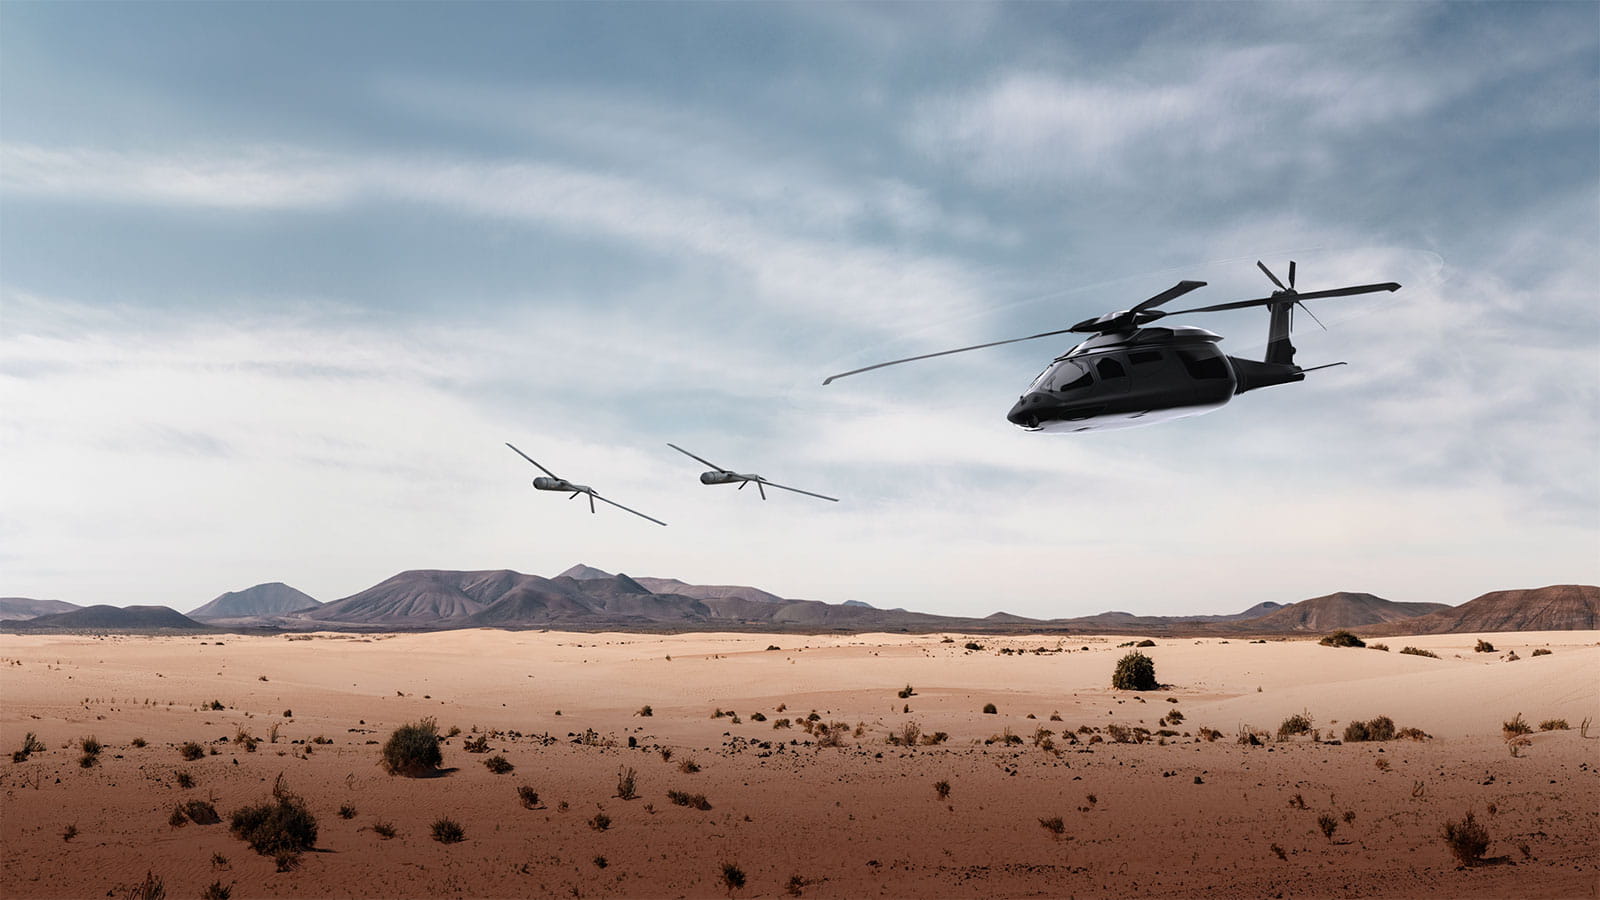 An graphic illustration of a black military helicopter flying low over a desert landscape in the daylight, with mountains in the distance and stratus clouds in the sky. Two unmanned aerial vehicles glide in the background.